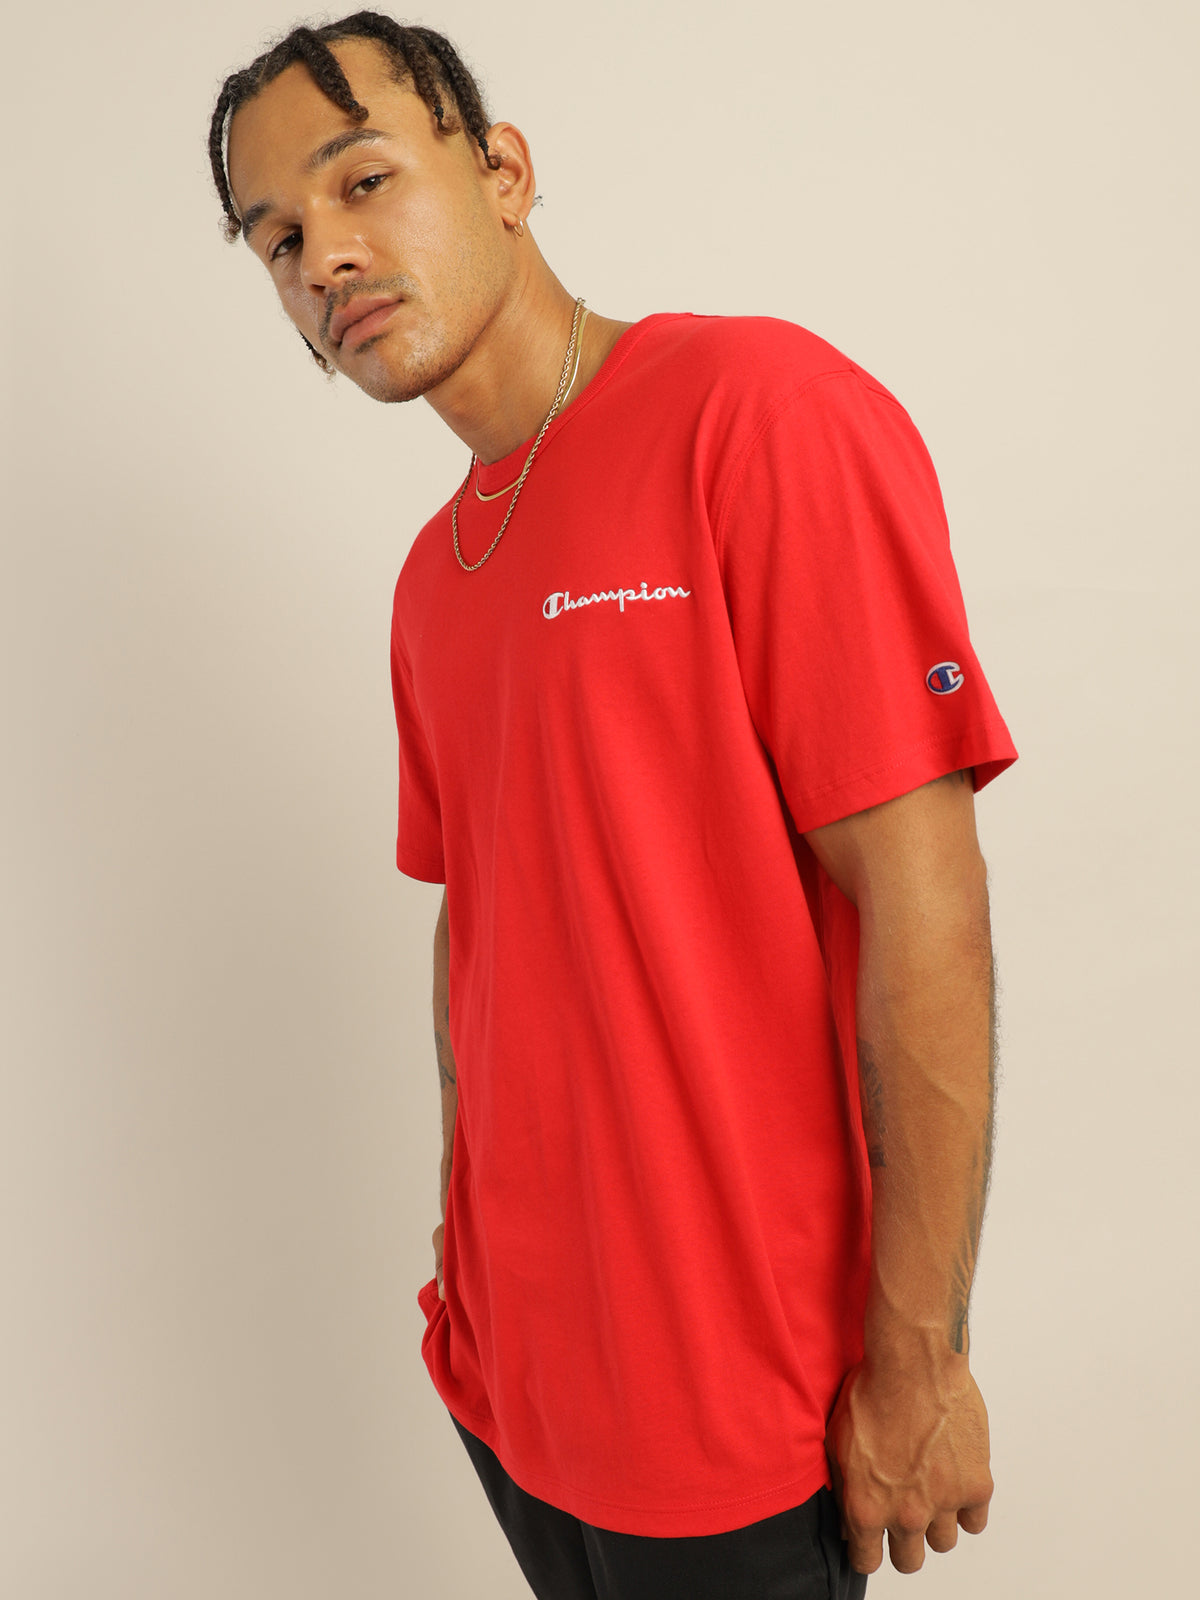 Heritage T-Shirt in Team Red Scarlet